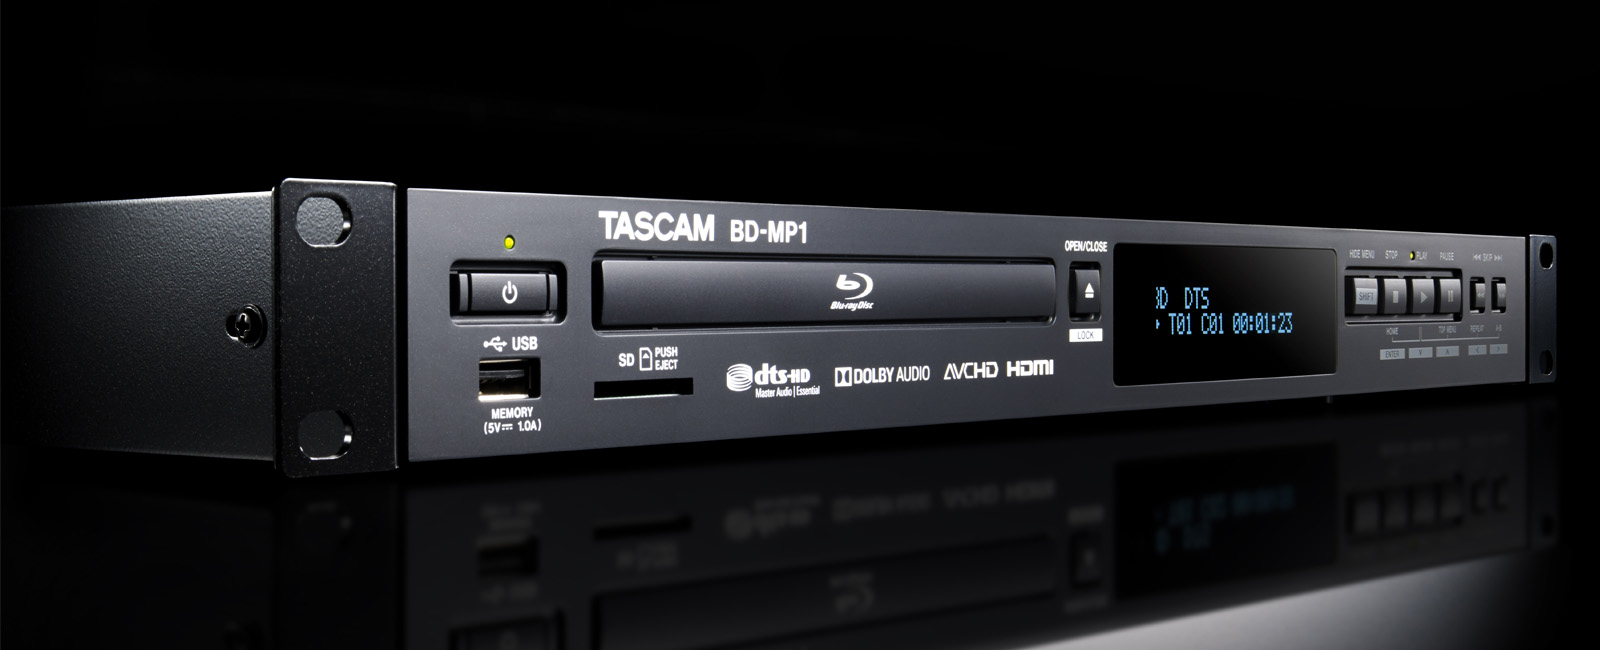 TASCAM Expands Professional Blu-ray Line with BD-MP1 Professional-Grade Blu-ray Player